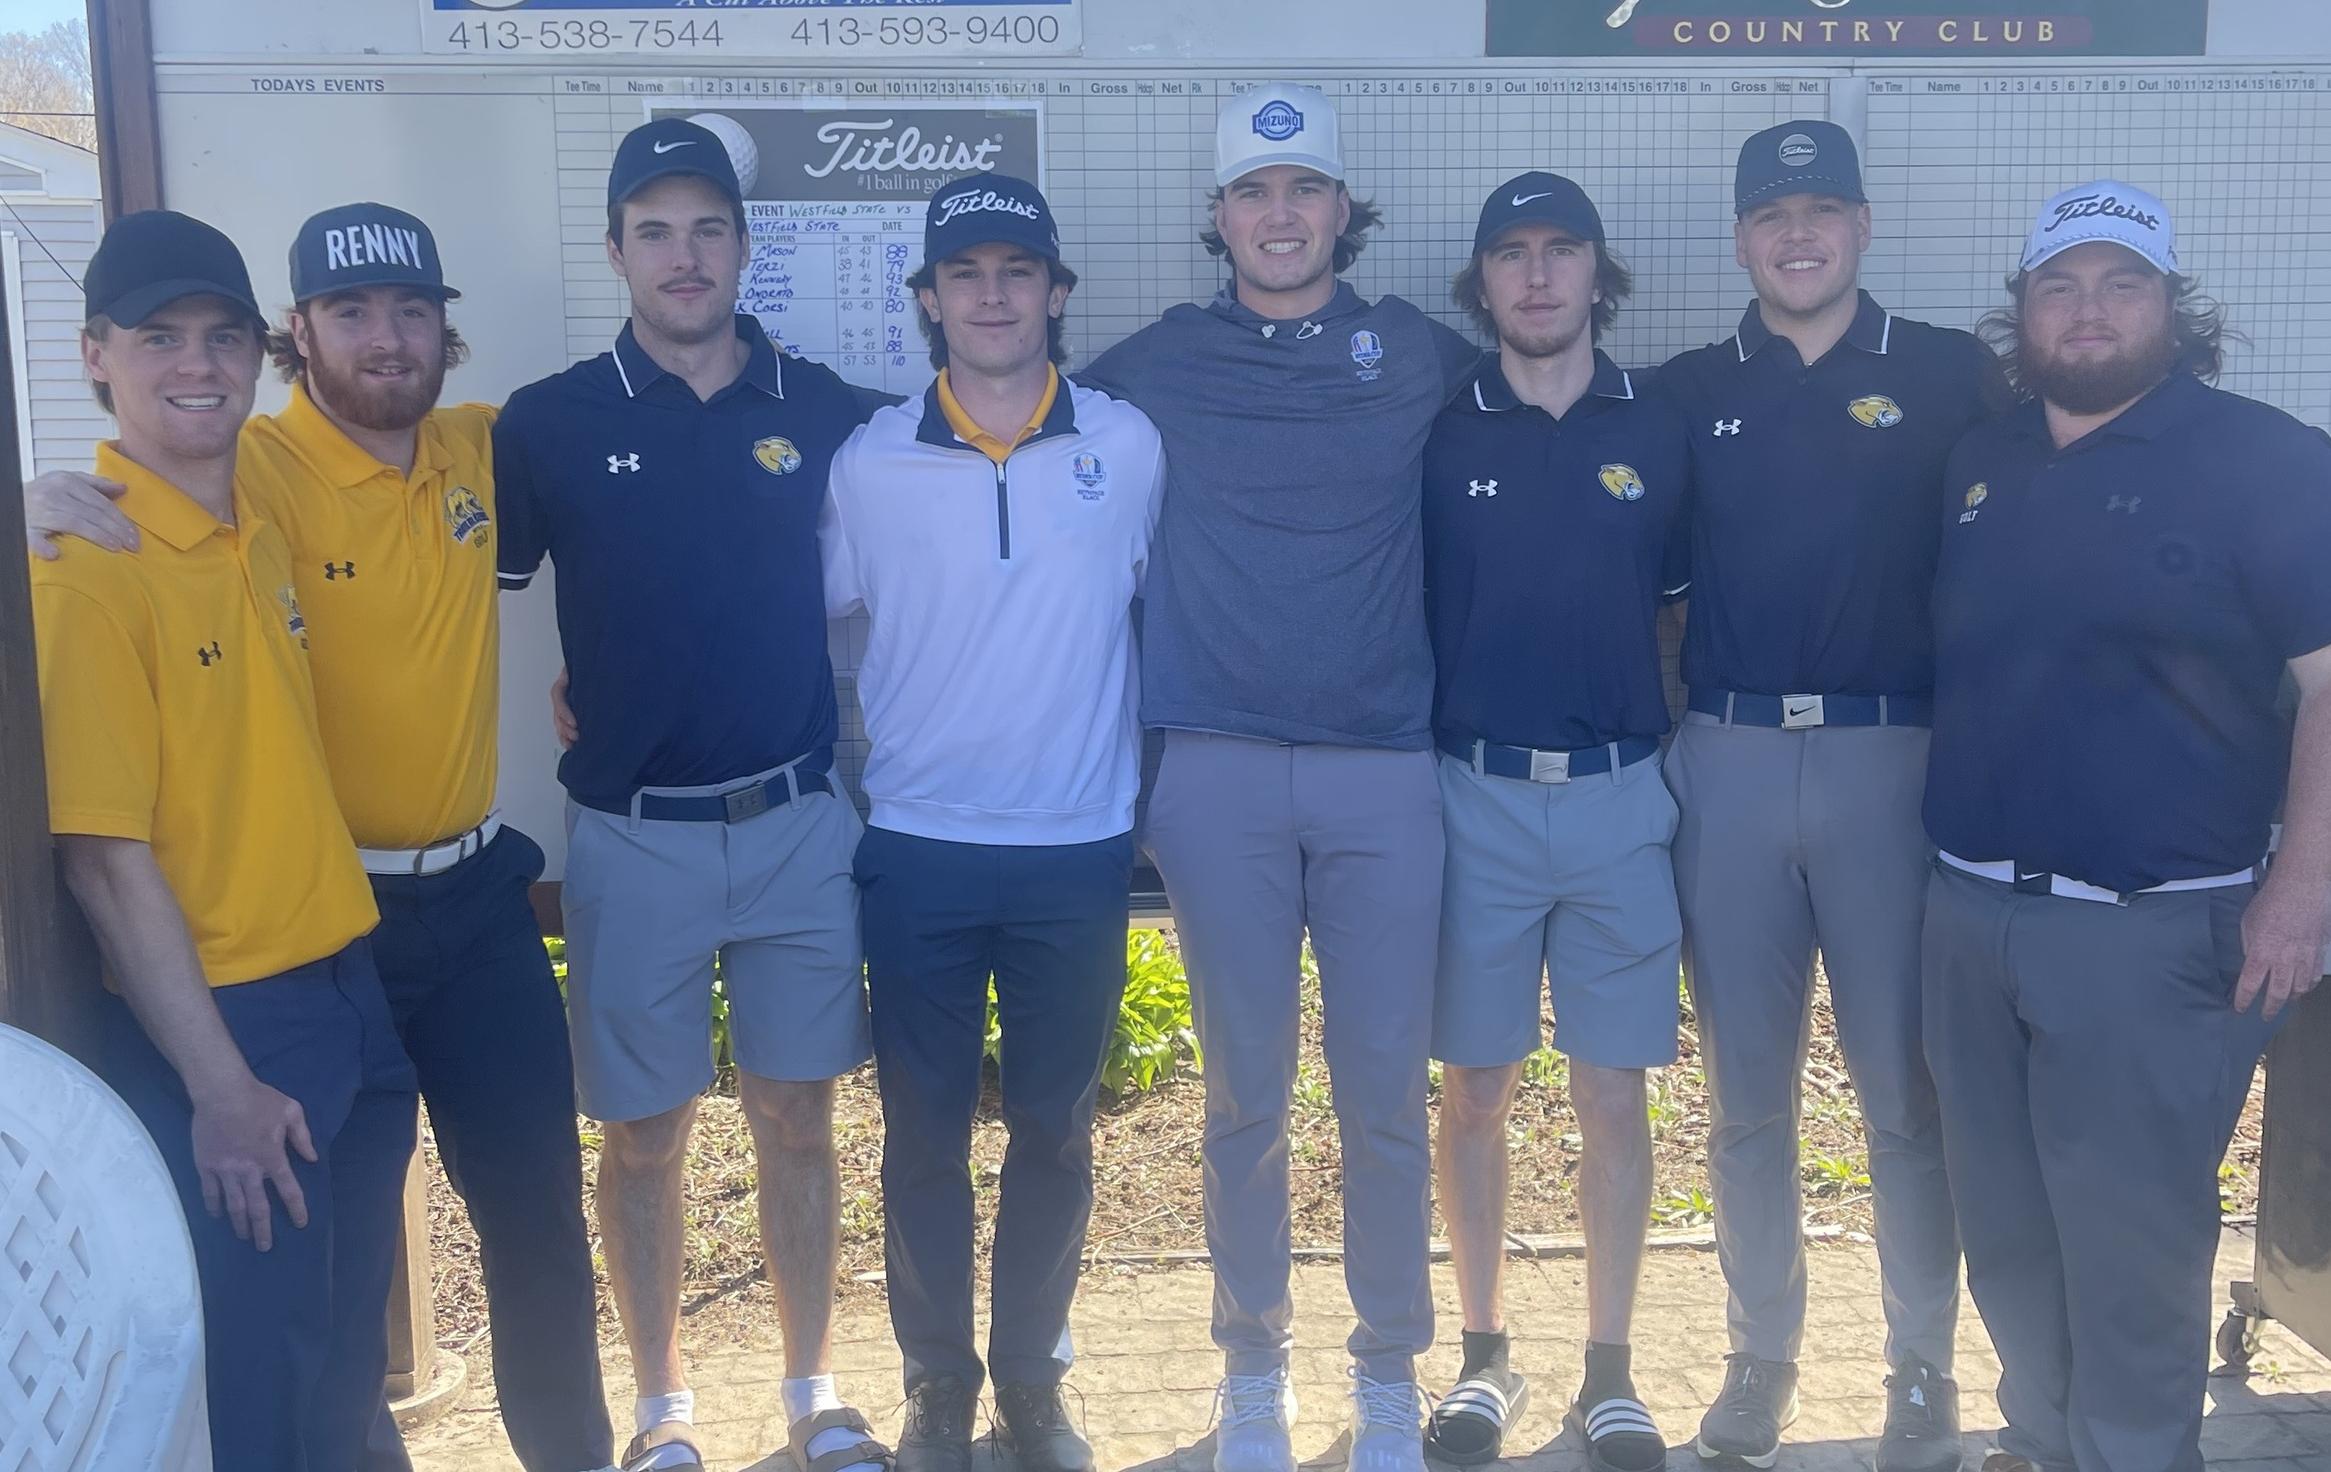 MCLA finished eight strokes better than Westfield State this afternoon in a dual match held at the Tekoa Country Club with Mat Gover claiming the individual title.